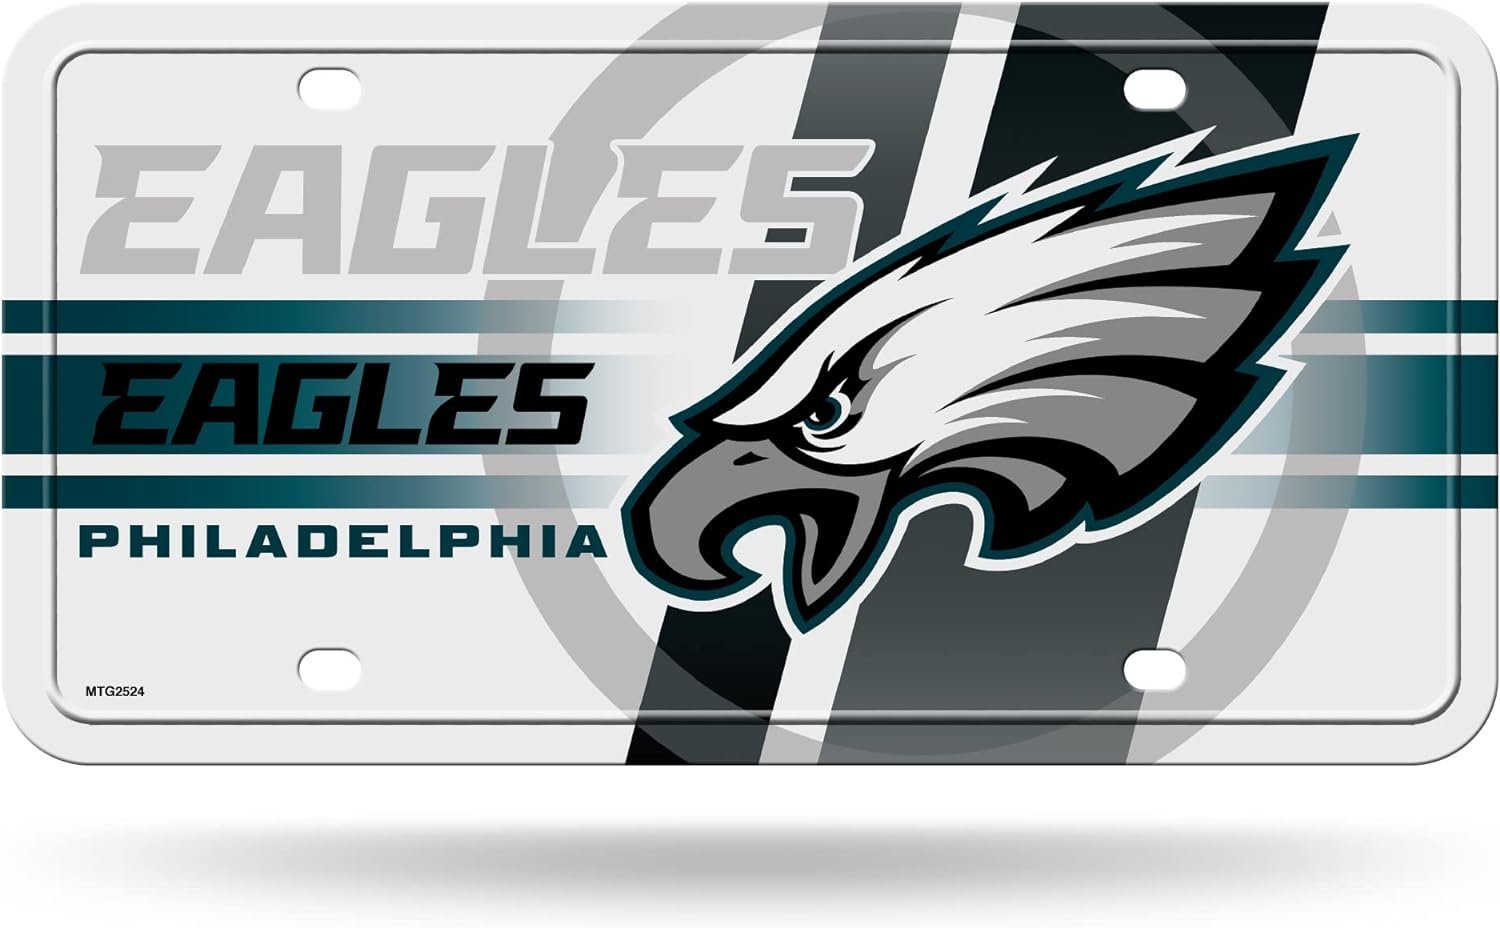 Philadelphia Eagles Metal Auto Tag License Plate, 12x6 Inch, Novelty, Great for Auto, Home or Office